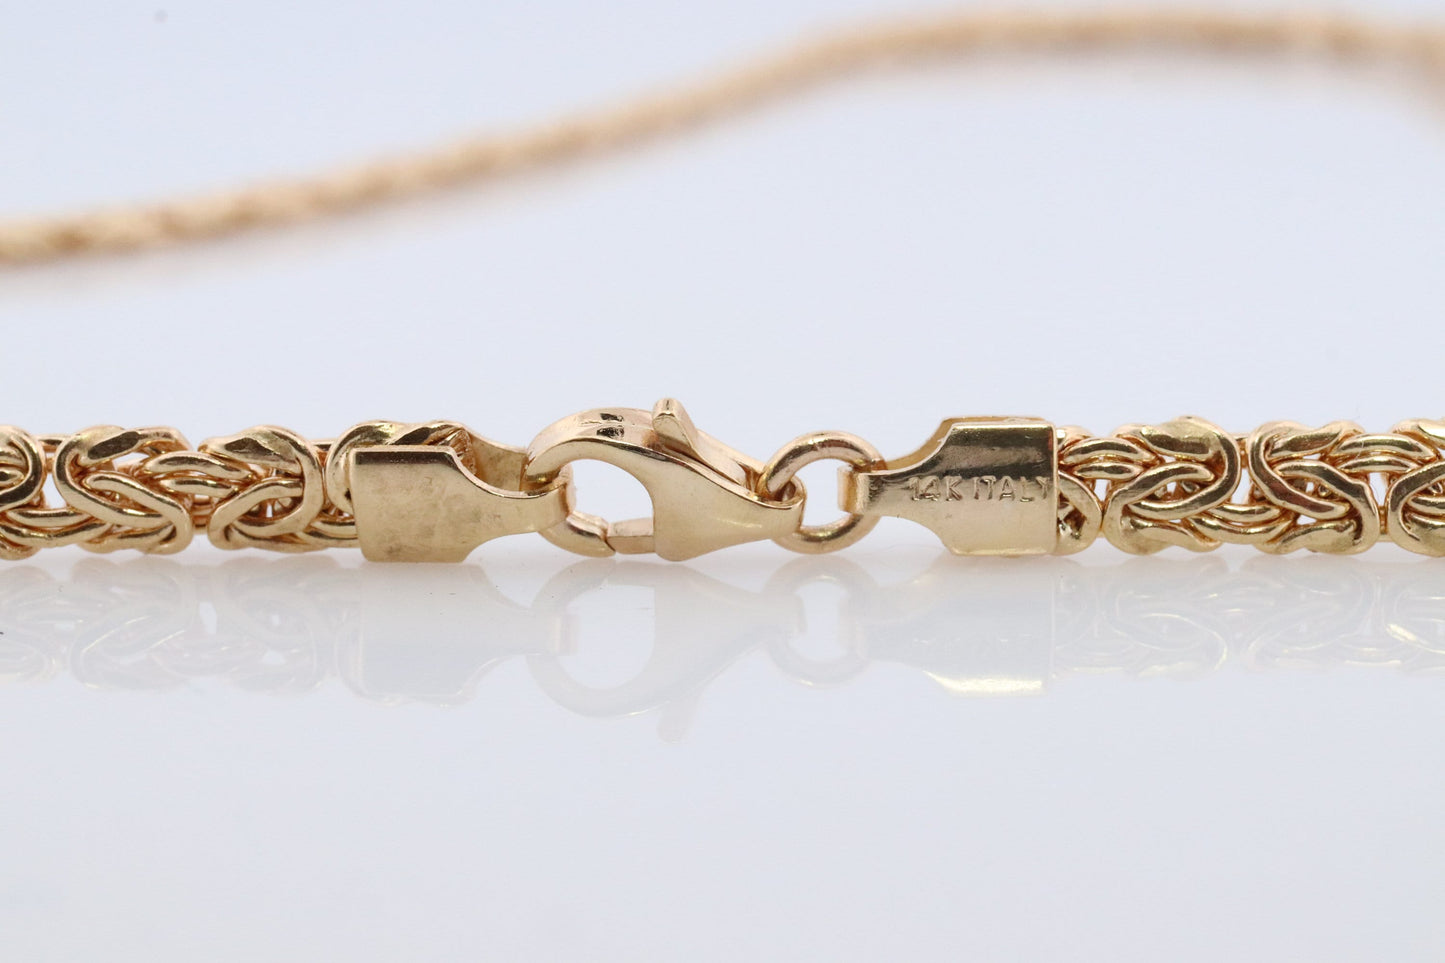 Byzantine chain Necklace. 14k Yellow Gold 585. 11.5grams. Graduated front. 14k yellow gold ITALY made. Gift for her.